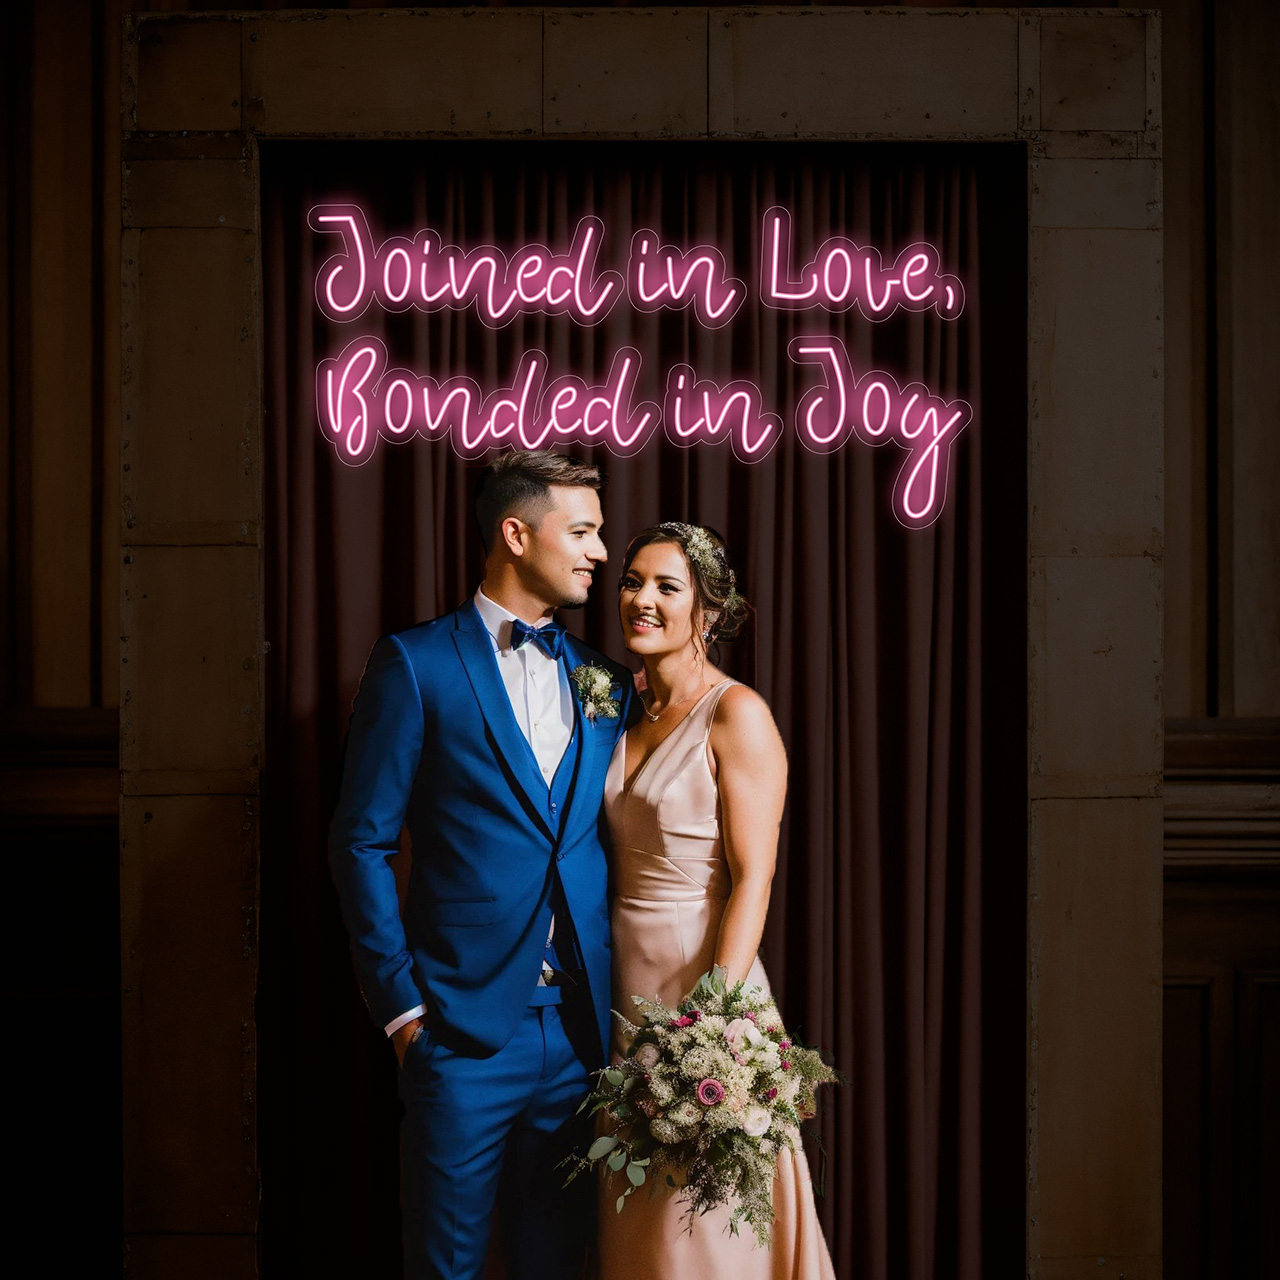 Joined in love, Bonded in Joy Neon Signs